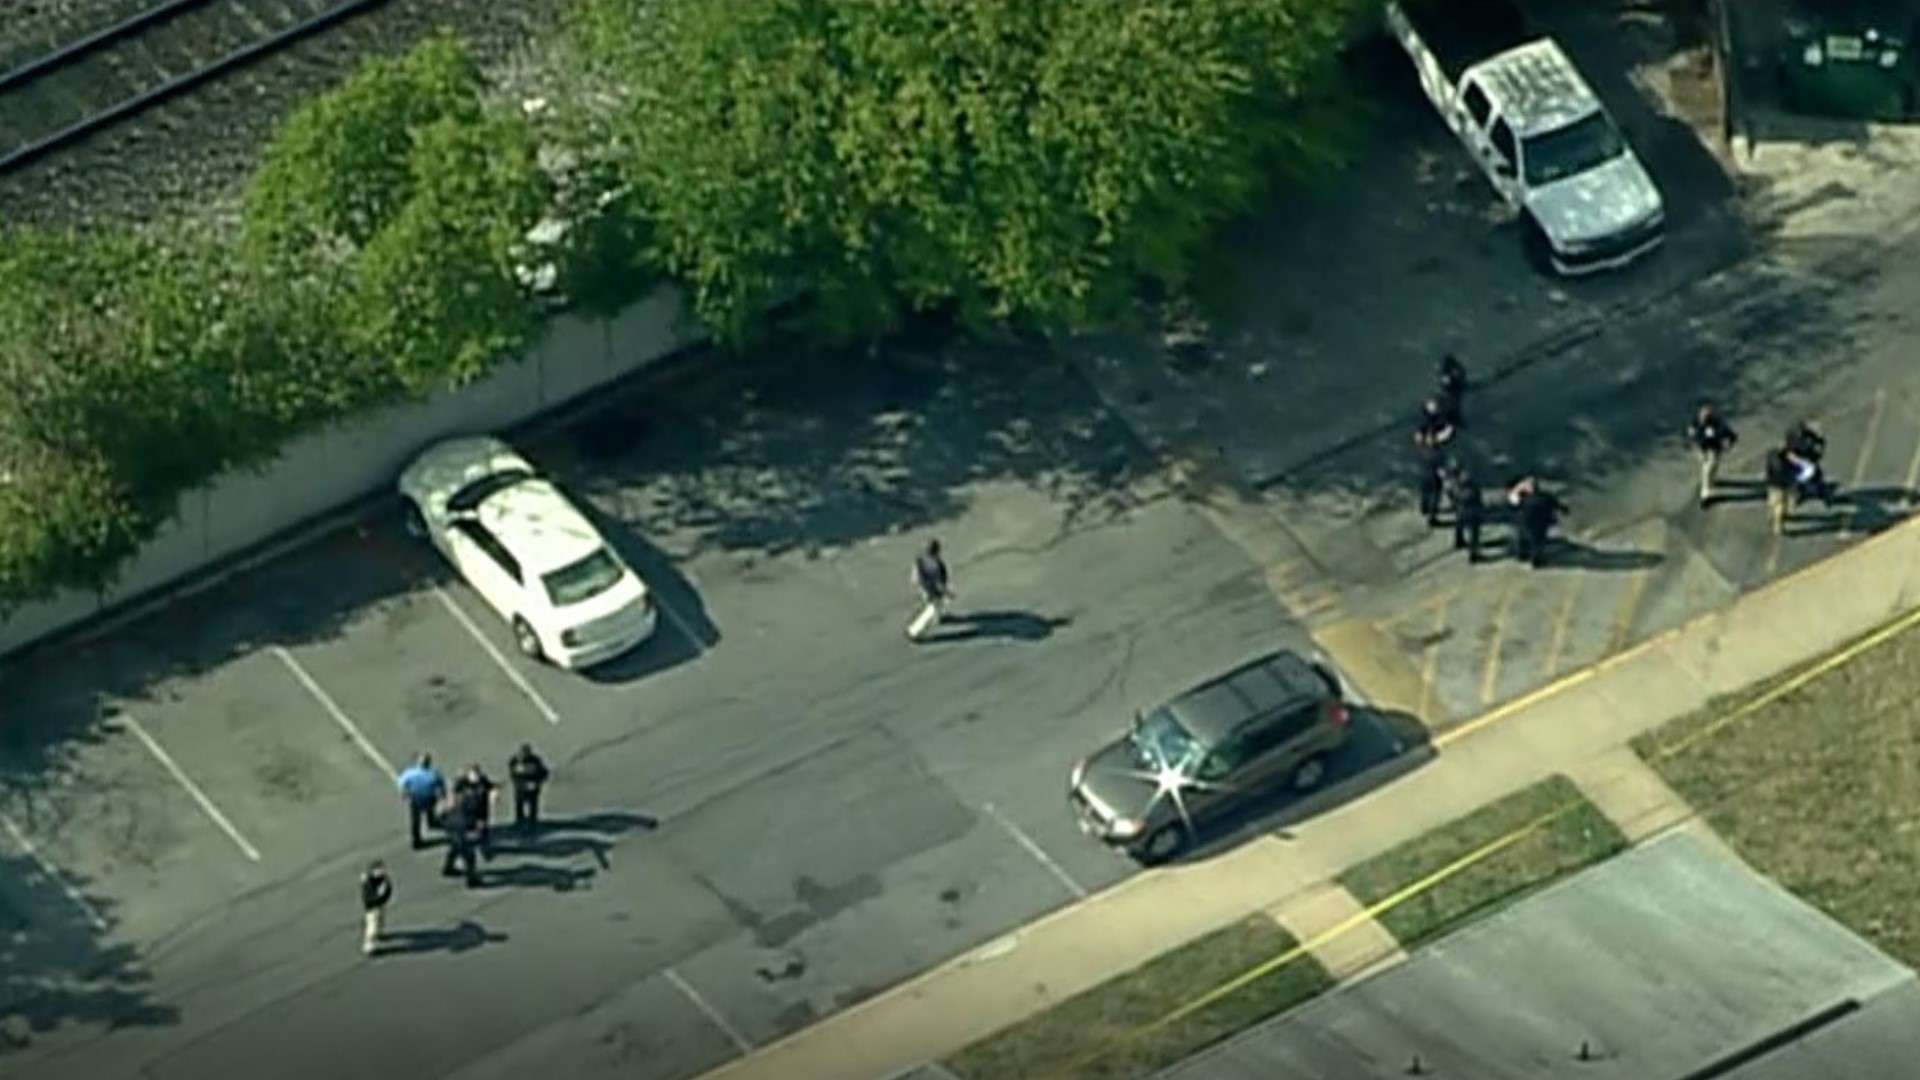 Officials have confirmed a police-involved shooting in Laurel, Maryland.

According to police, the shooting occurred in Route 197 and Elaine Court. There are no injuries reported. The suspect, is still on the run.